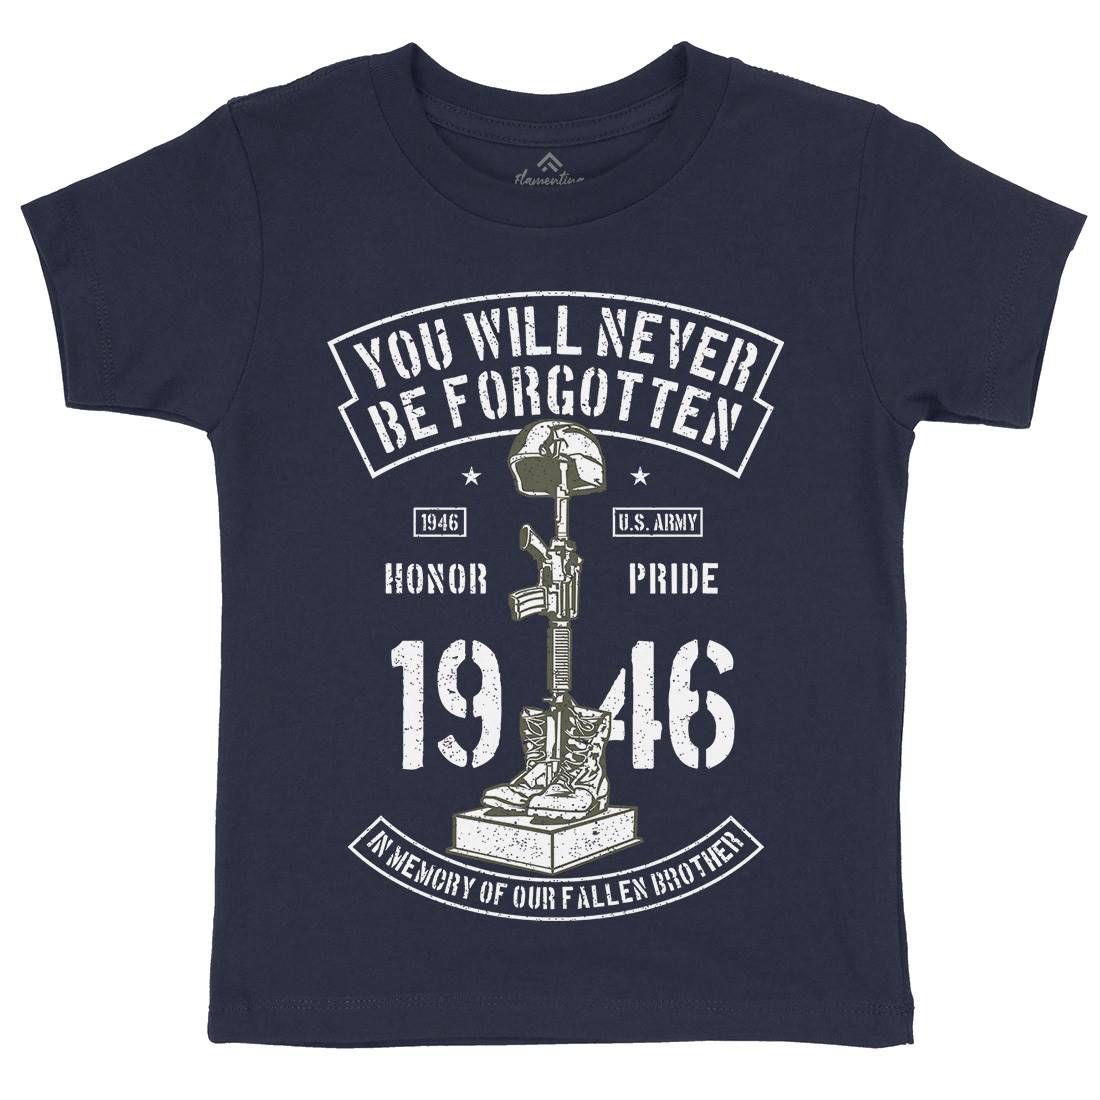 You Will Never Be Forgotten Kids Crew Neck T-Shirt Army A800